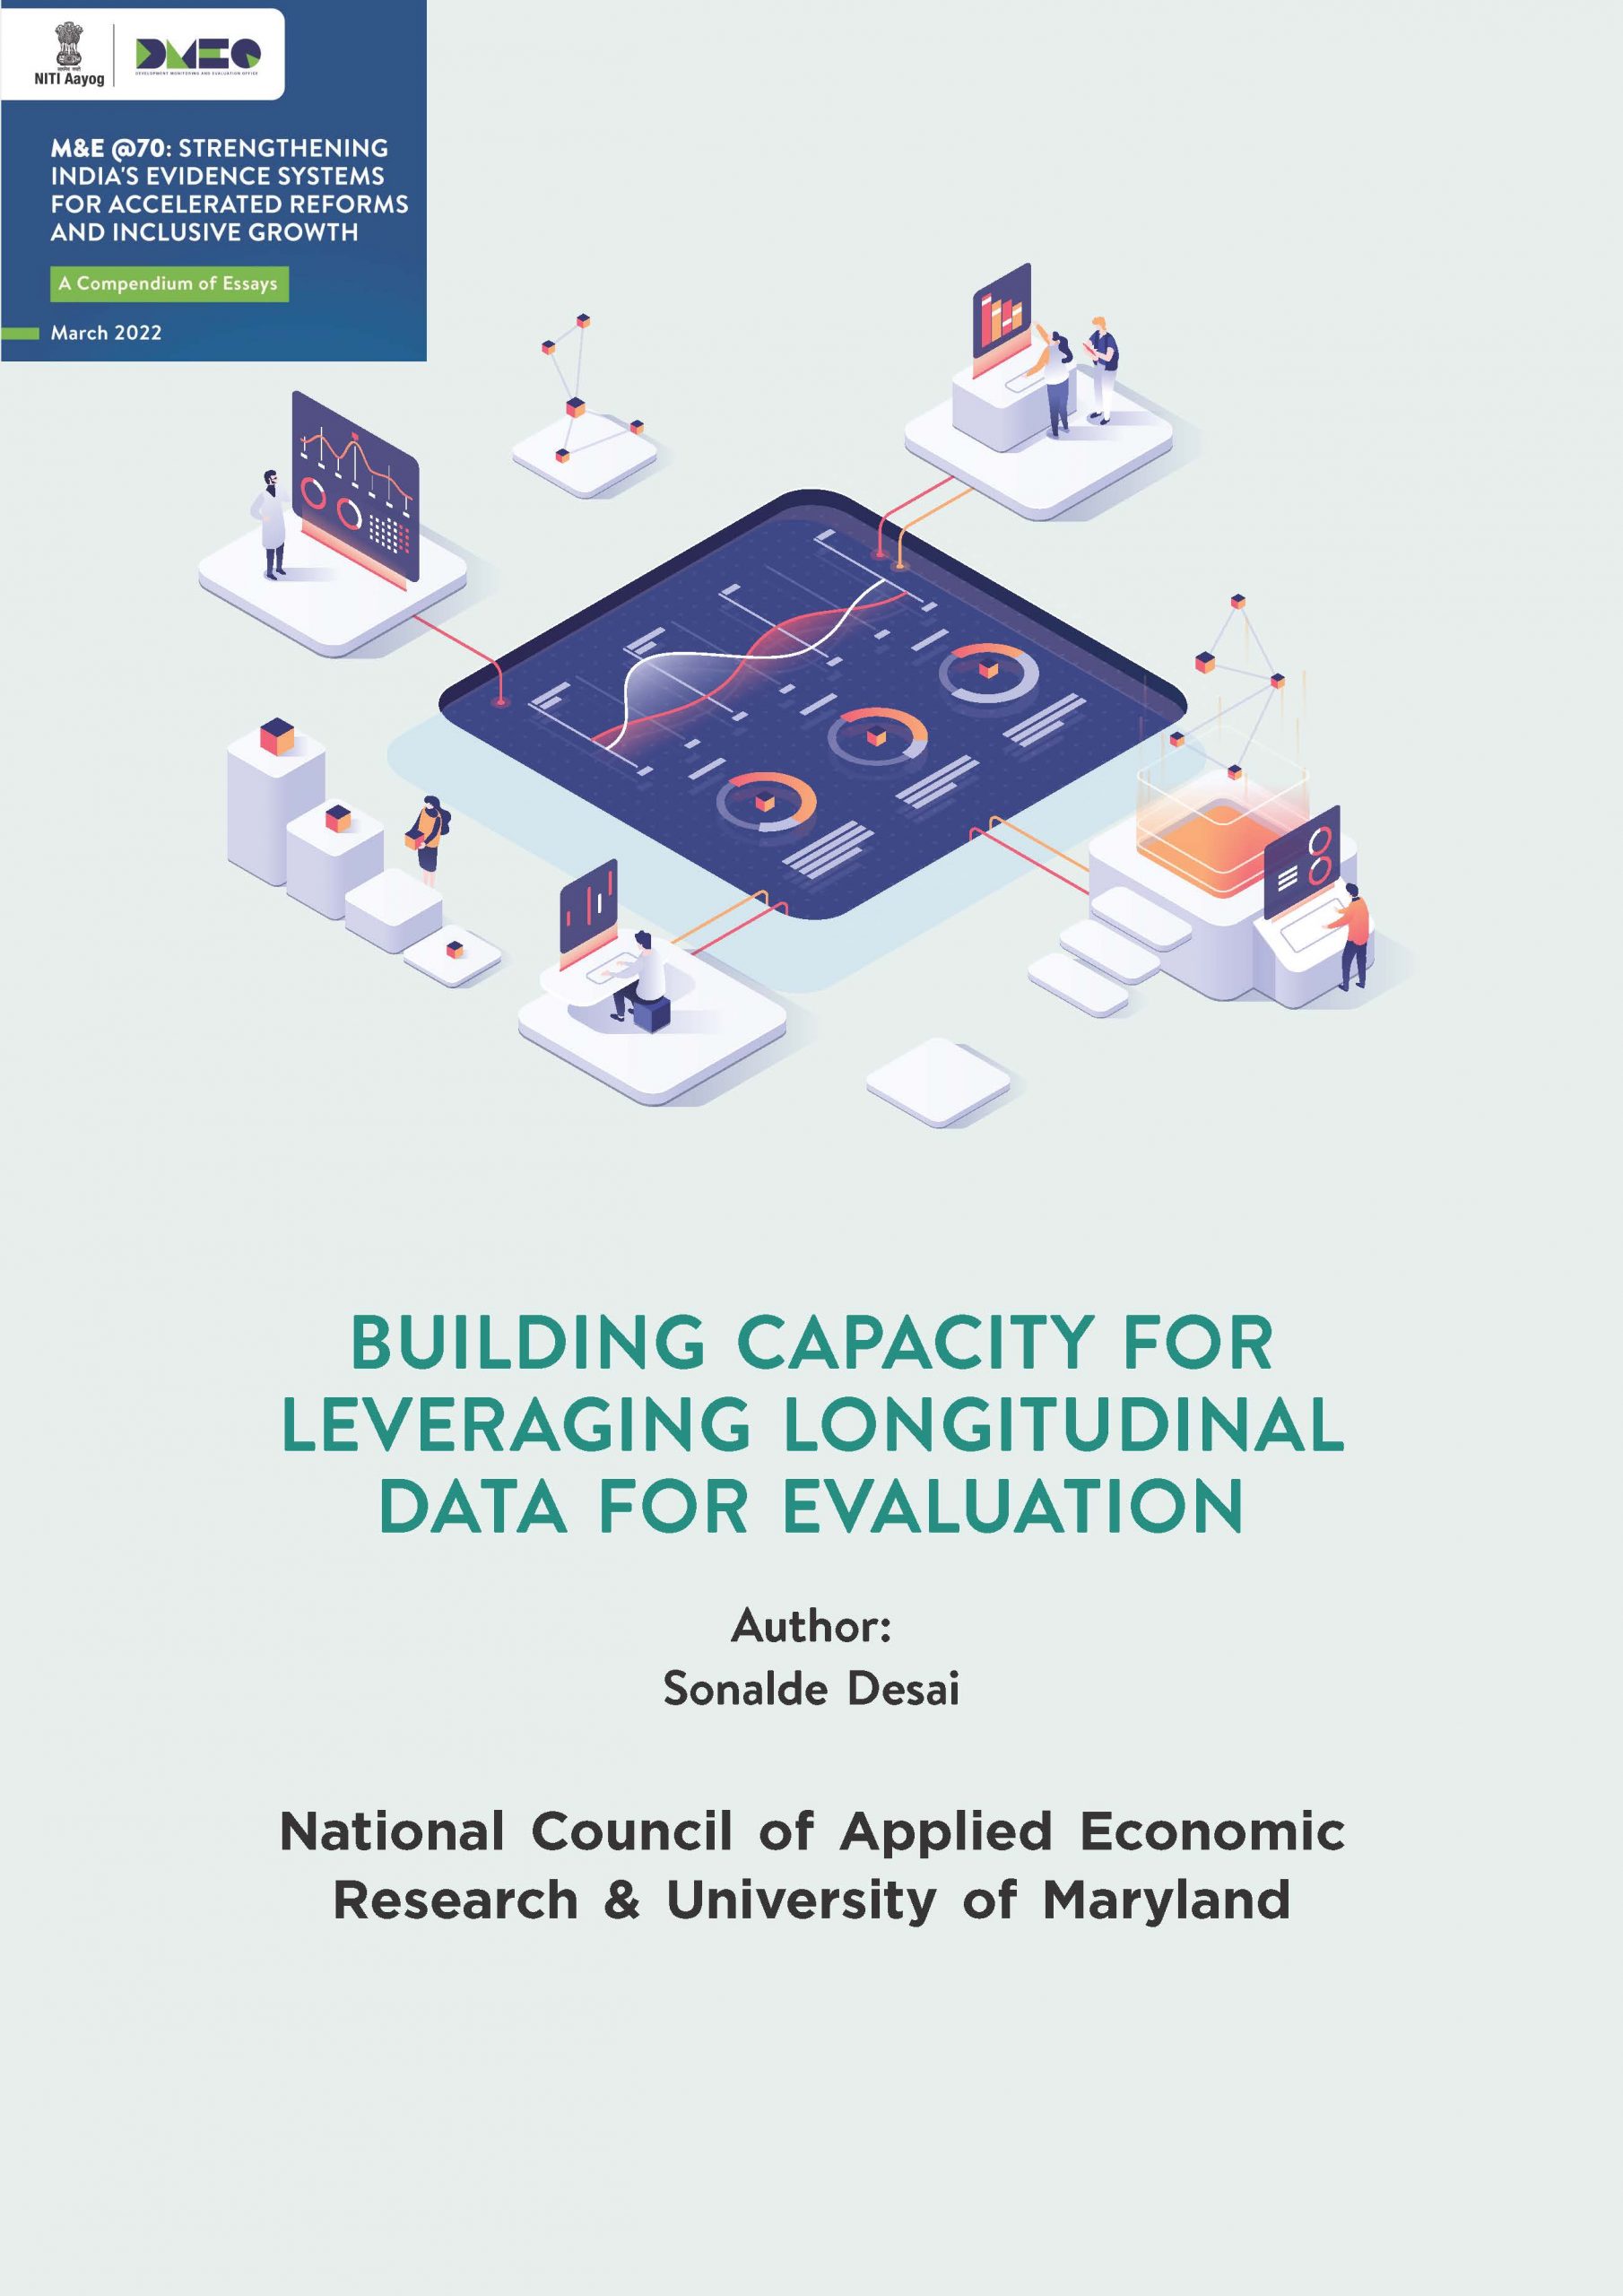 Building Capacity for Leveraging Longitudinal Data for Evaluation March 2022